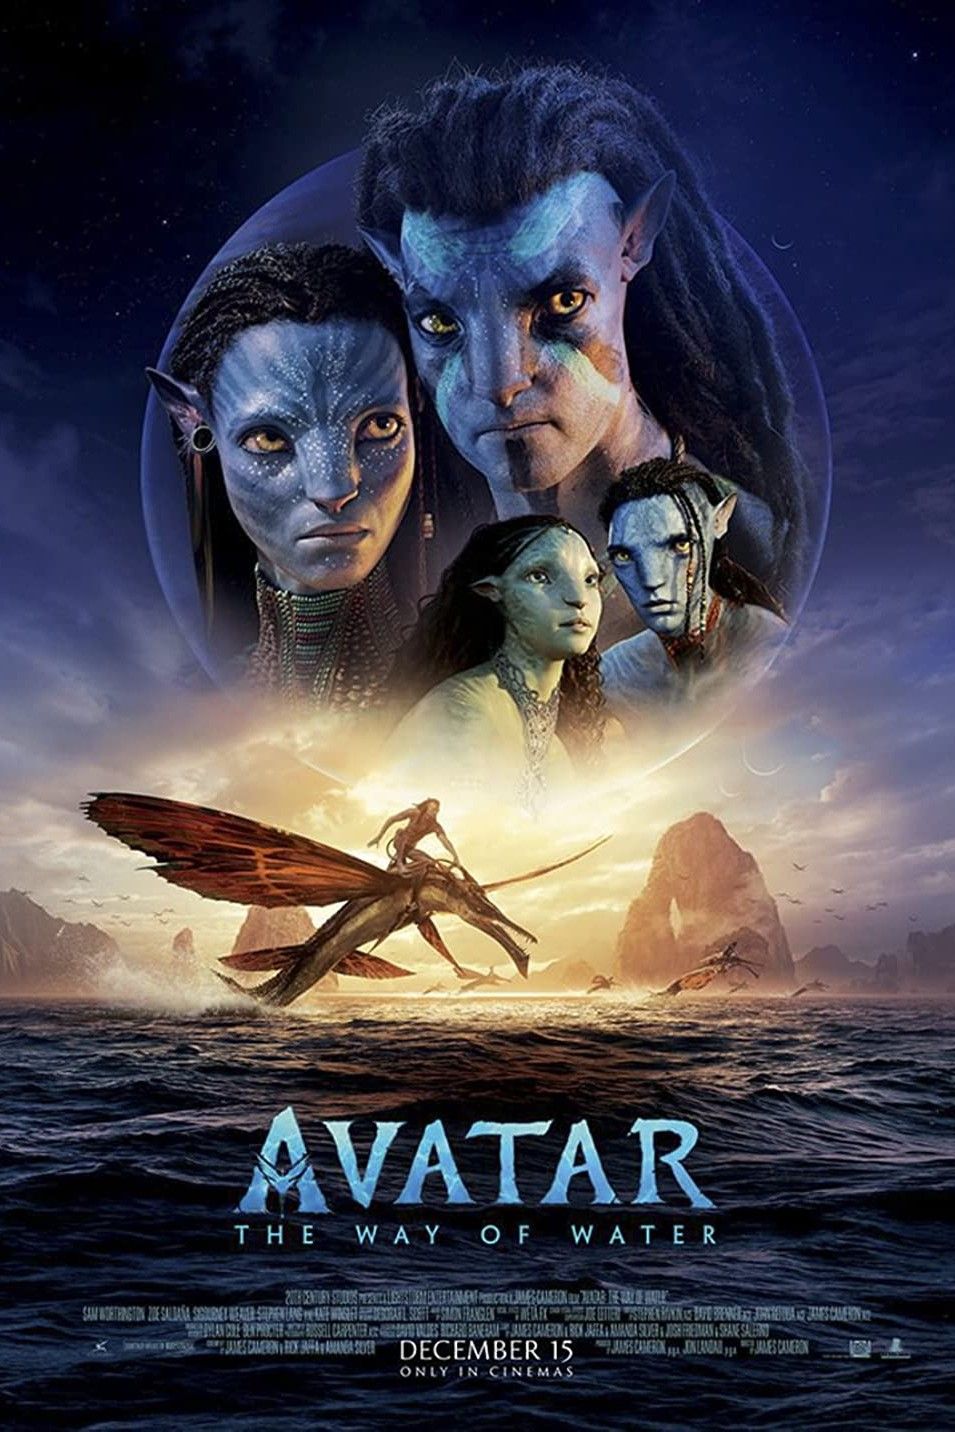 Avatar: The Way of Water (2022) | ScreenRant